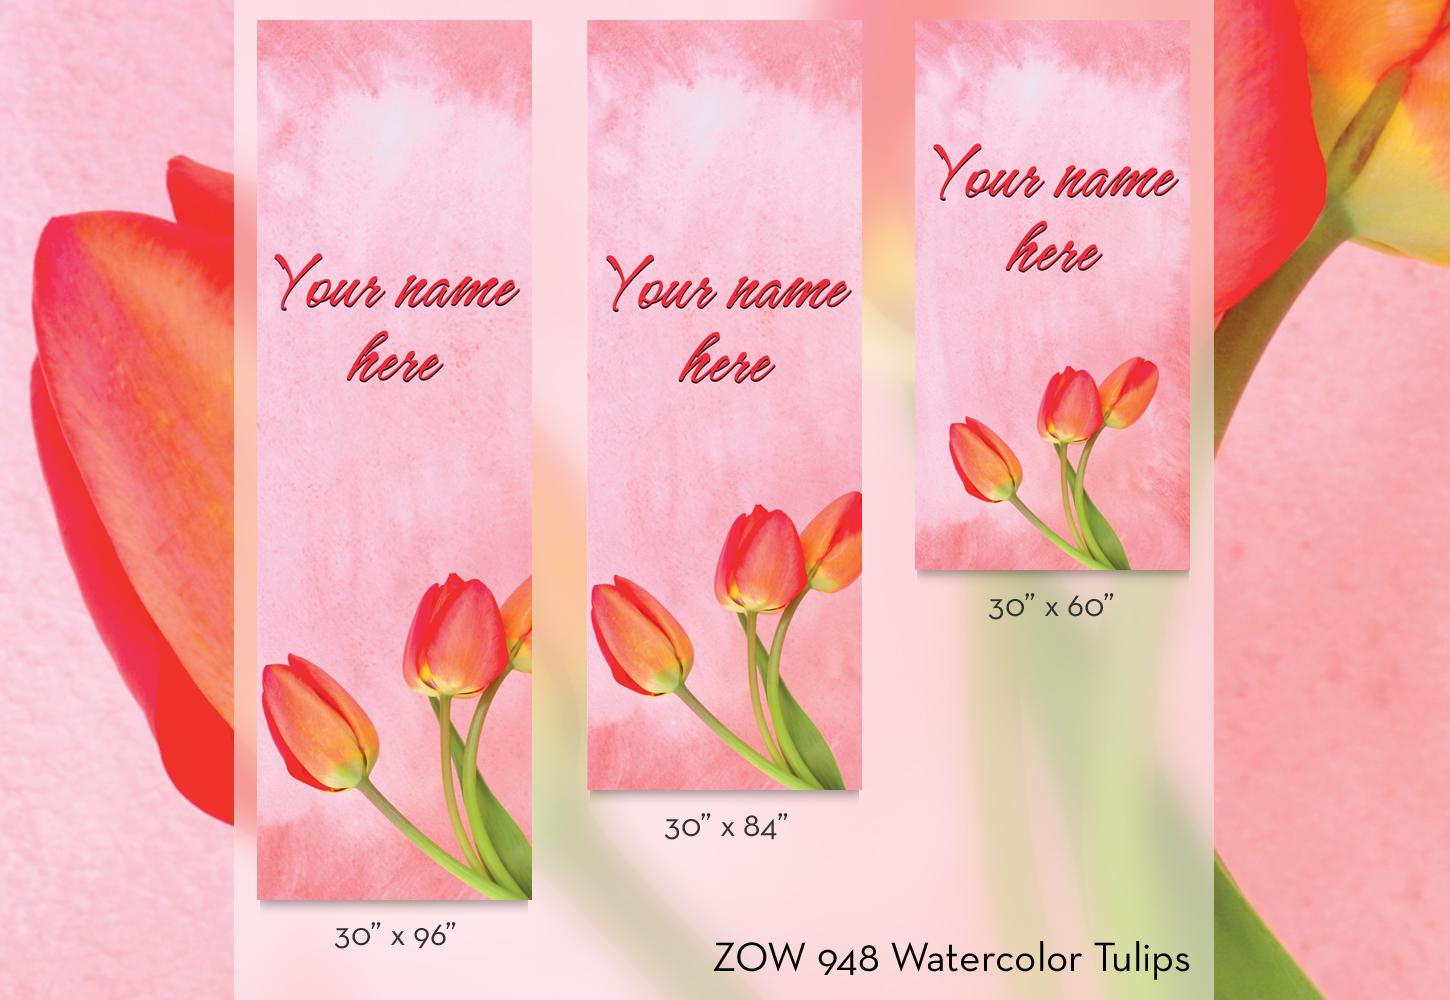 ZOW 948 Watercolor Tulips